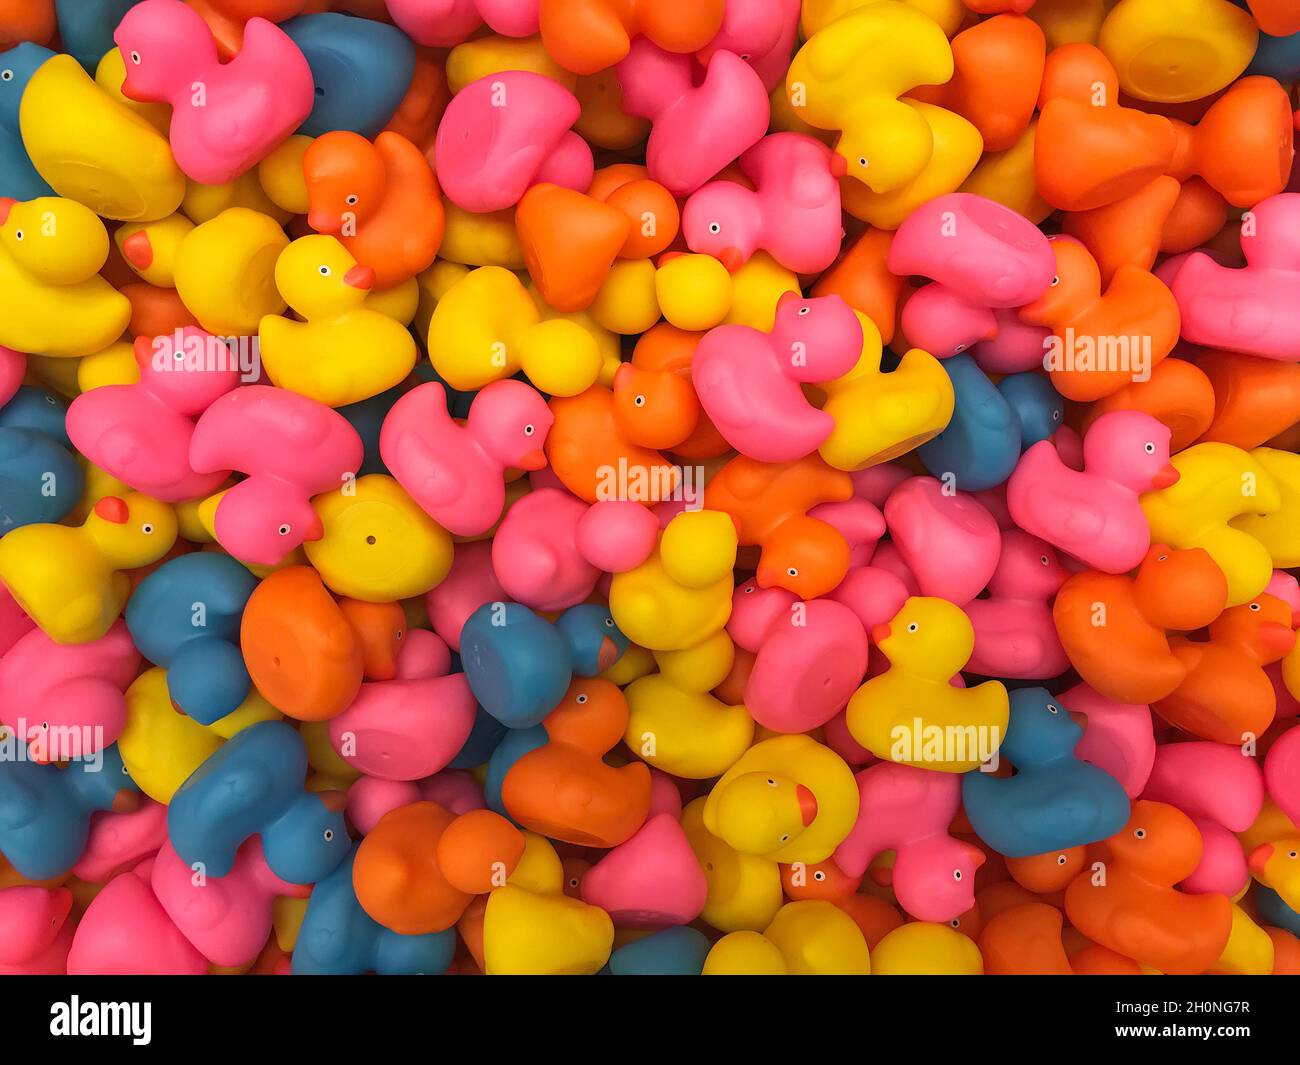 Creative background with colorful rubber ducks. Minimal holiday concept. Stock Photo